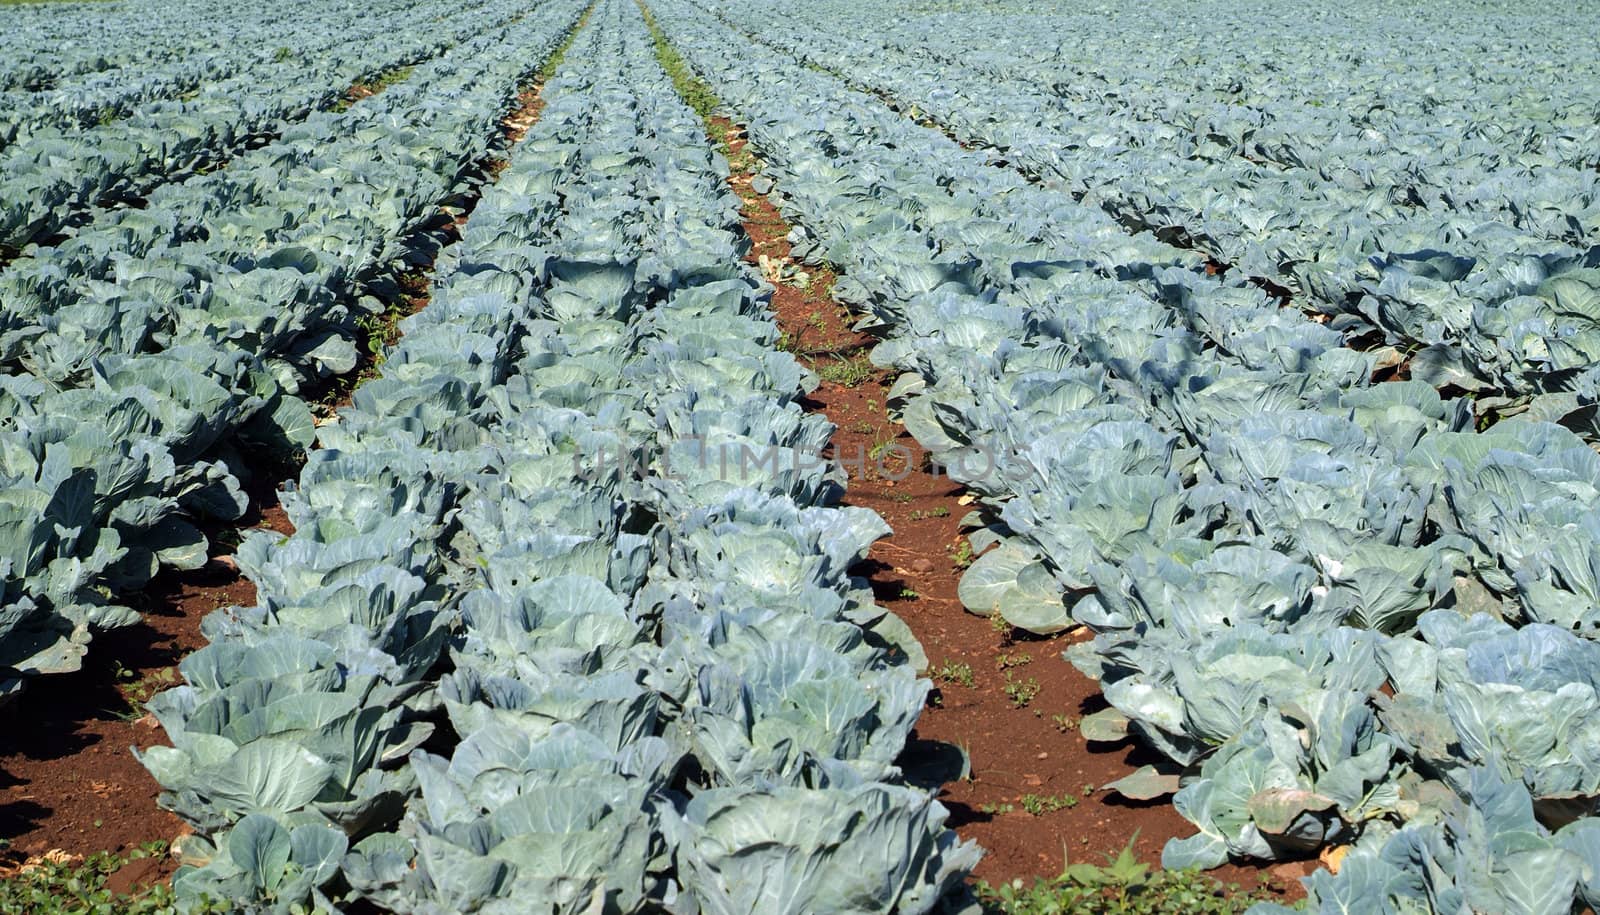 Rows of cabbages growing in rural farm field